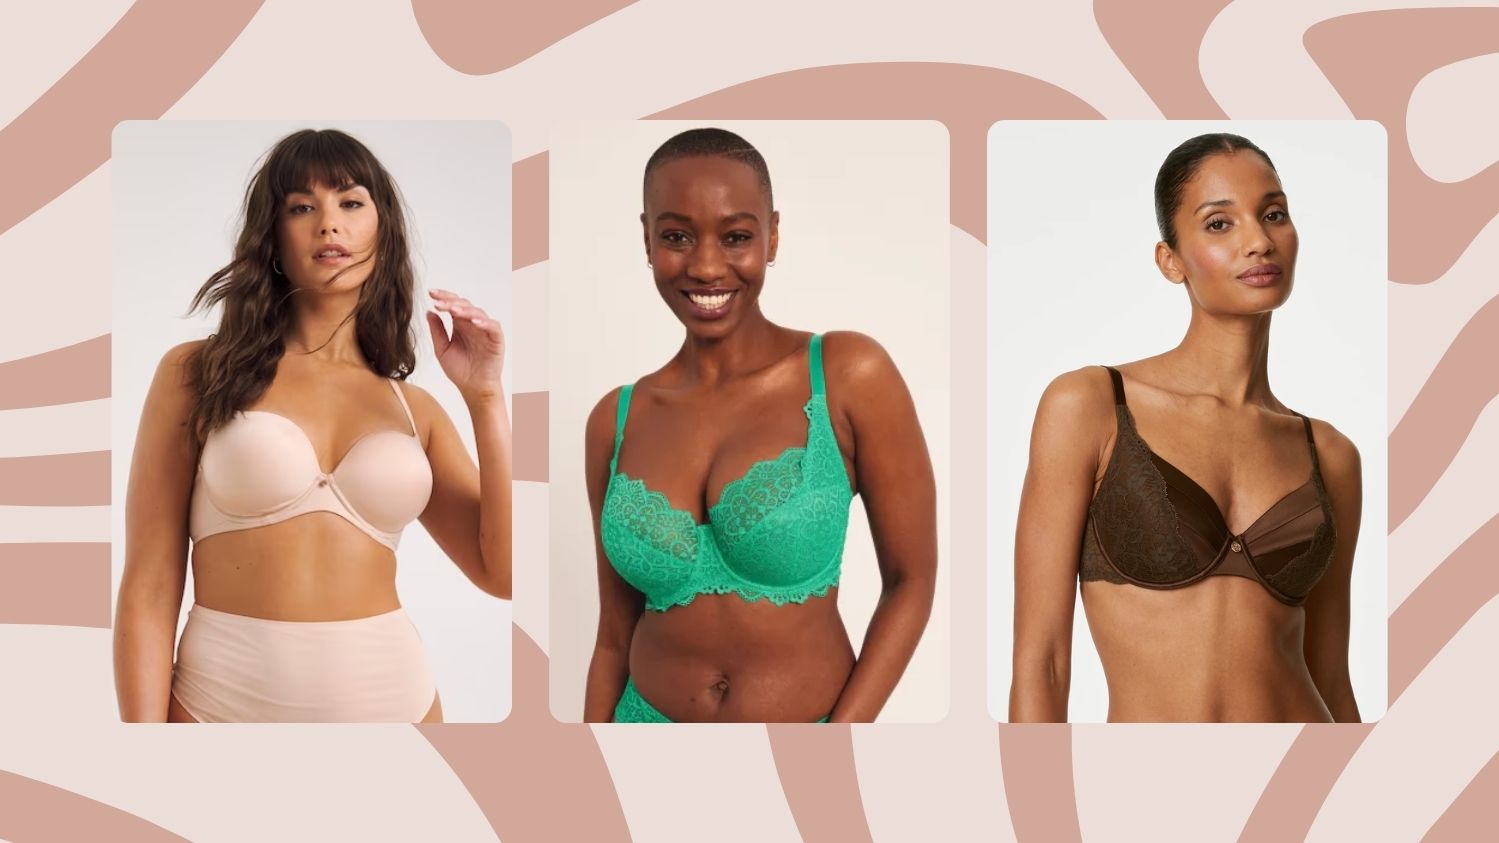 How to Find the Best Bra Style for Your Breast Type